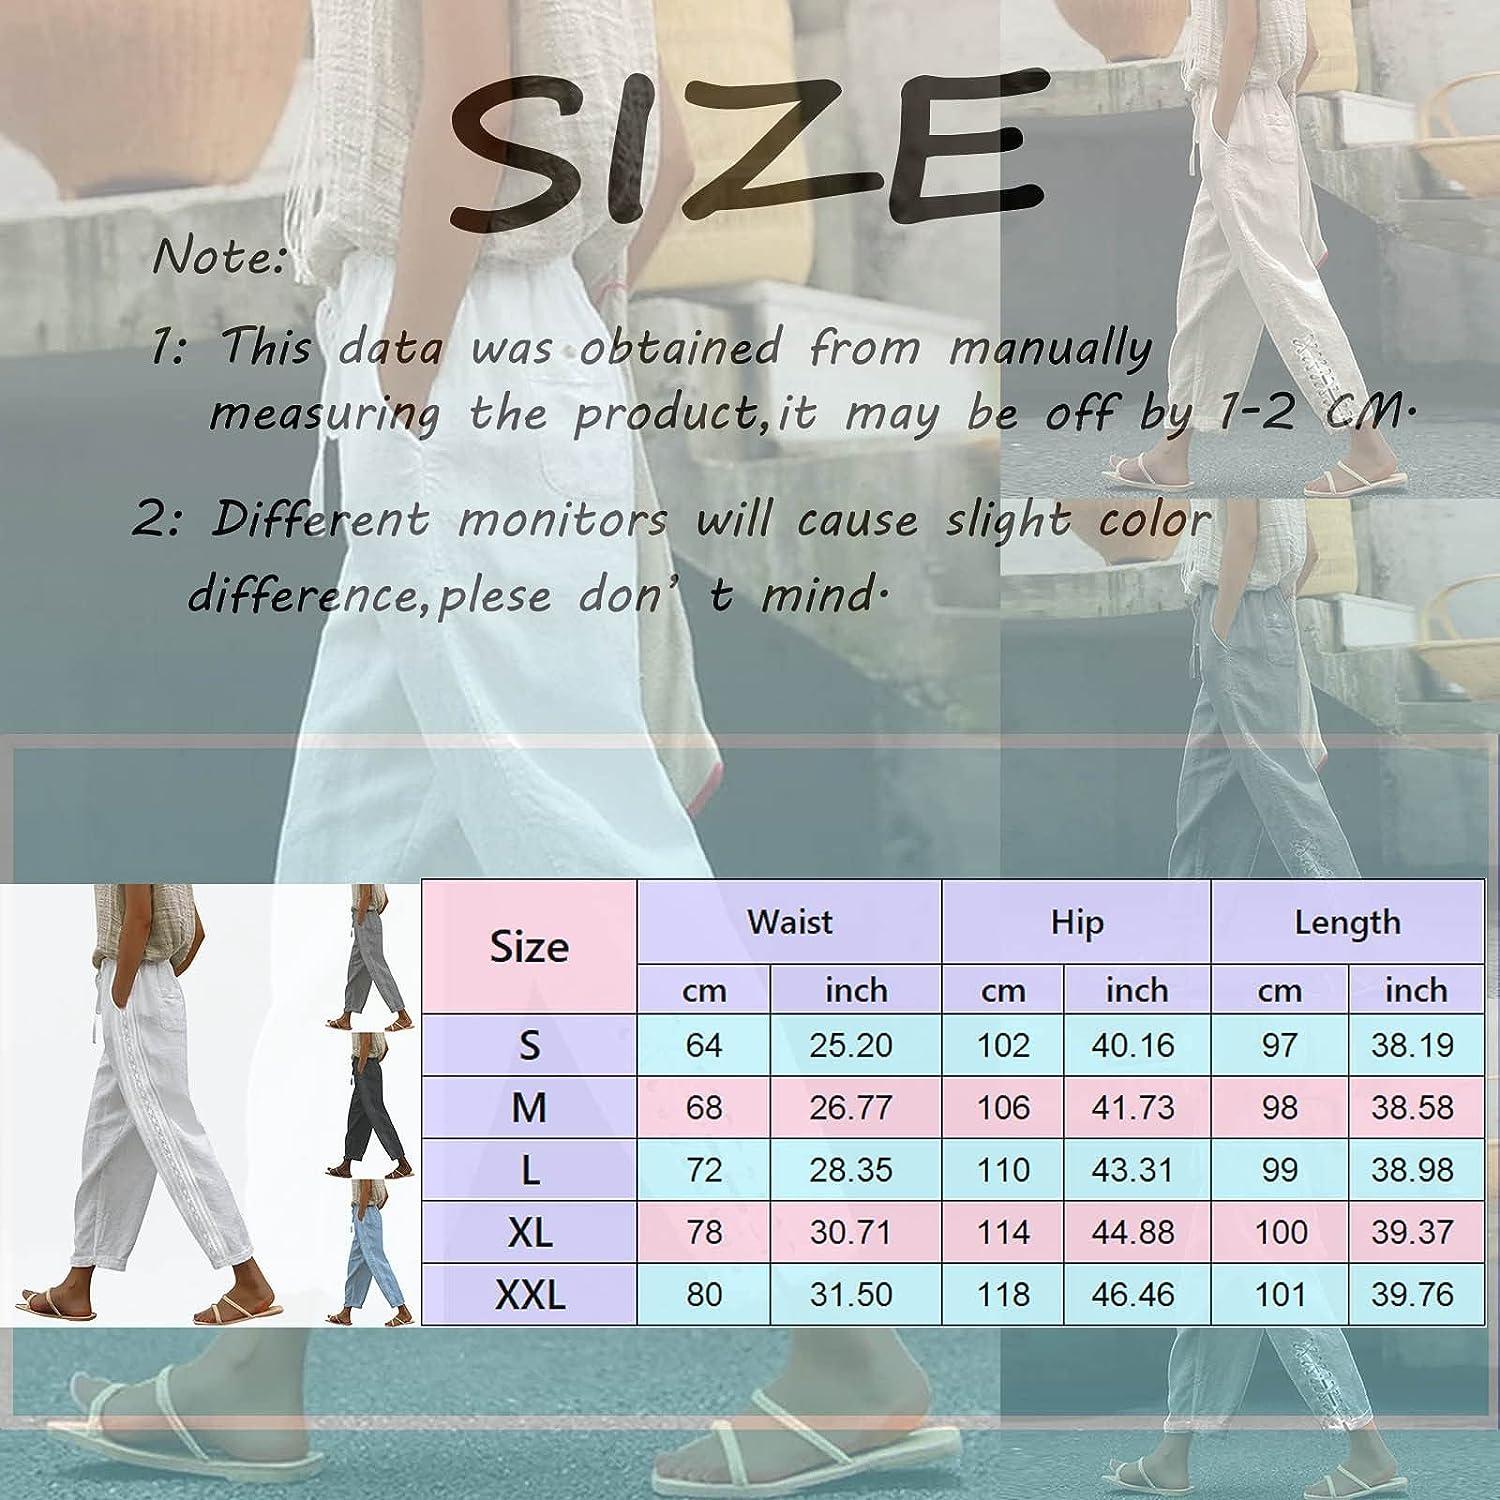 Women Casual Linen Beach Pants Tapered Pants with Pocket